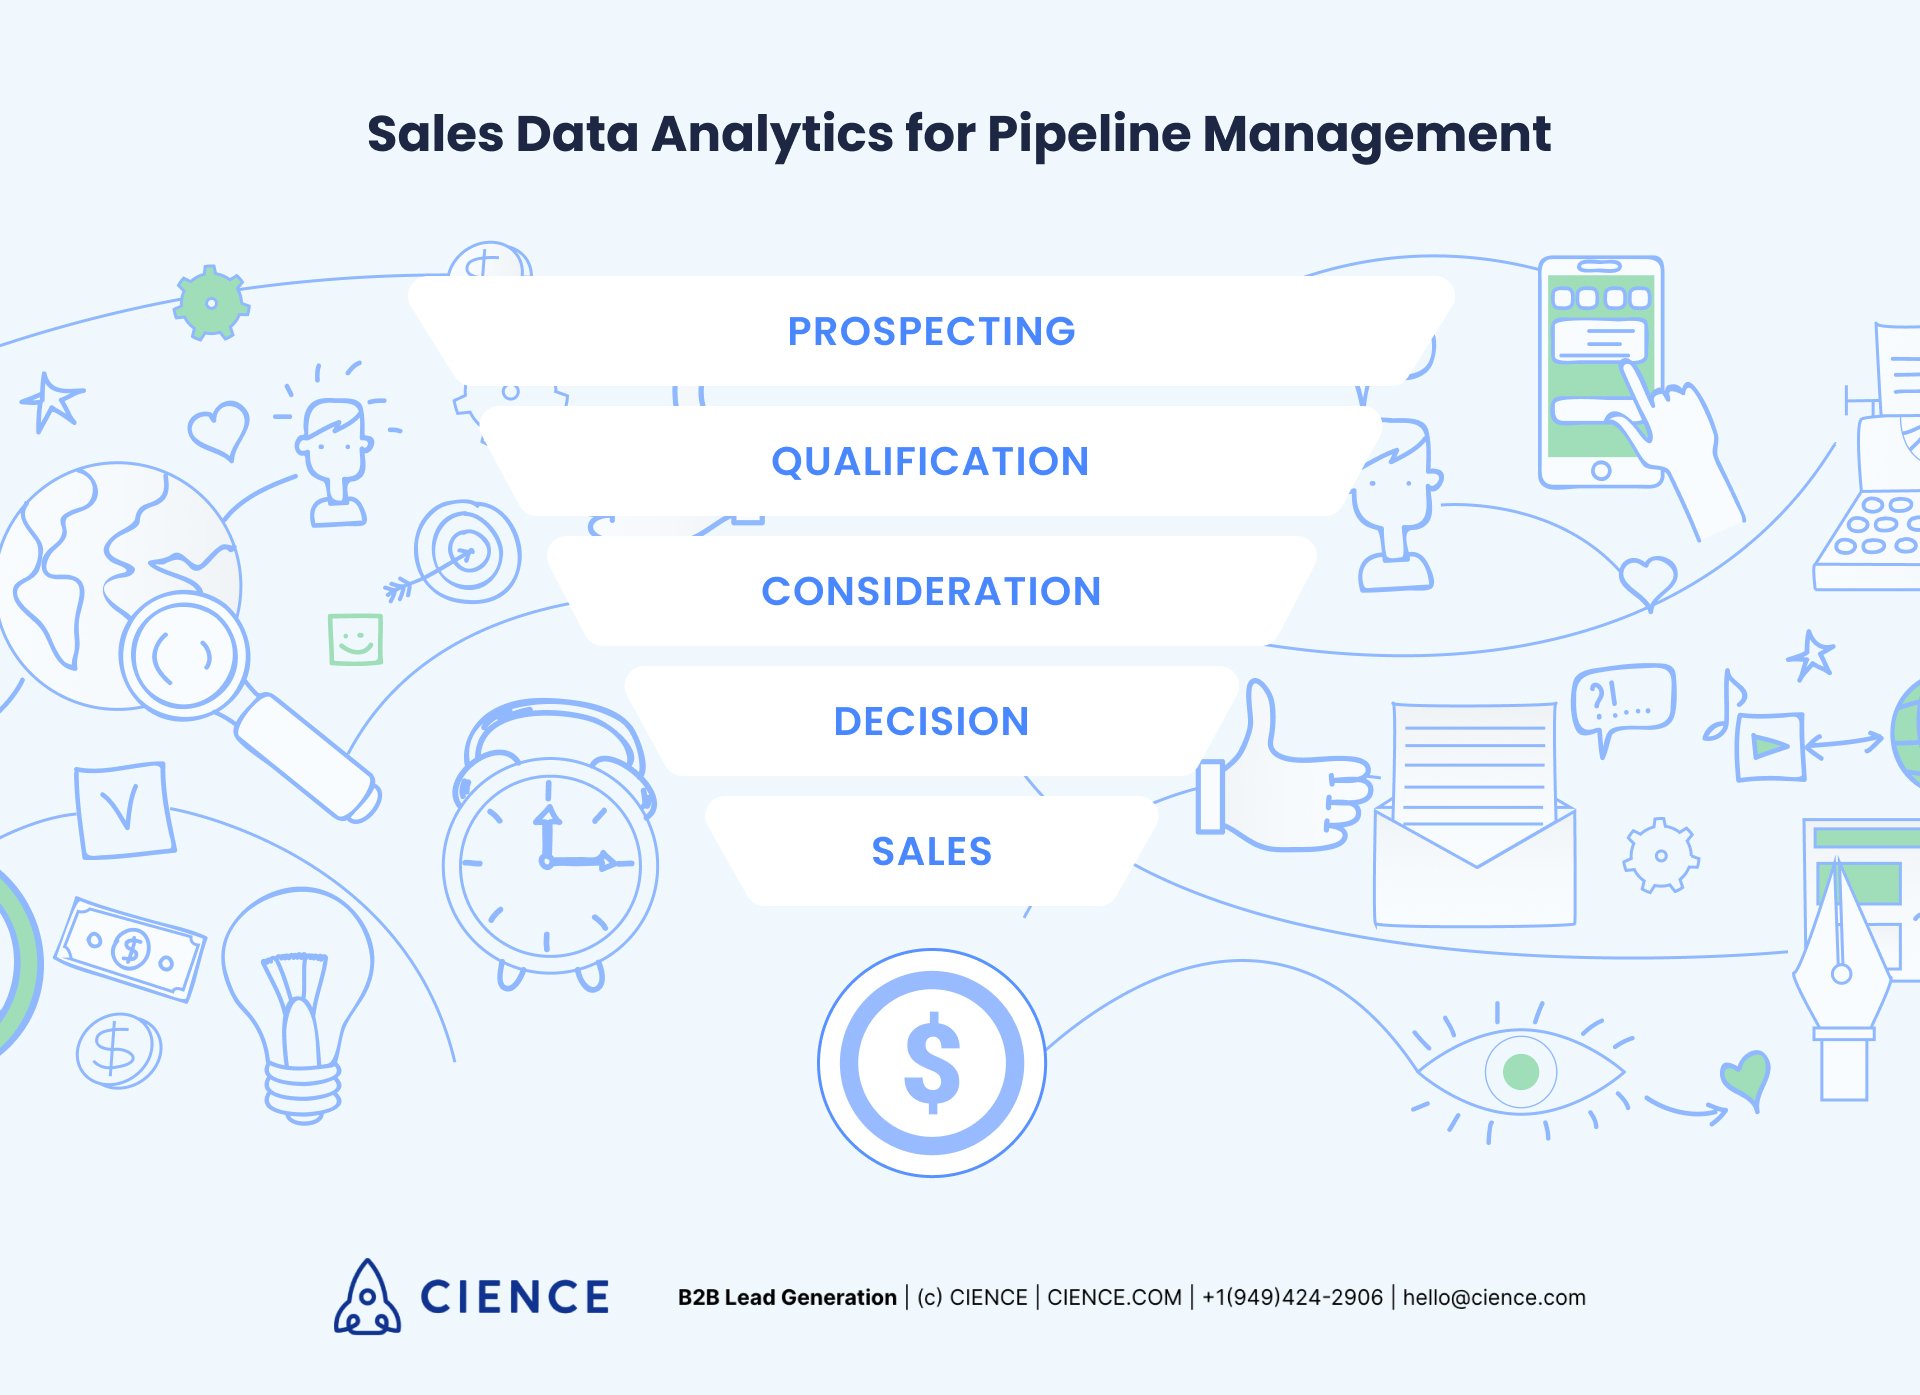 Using sales data analytics for pipeline management